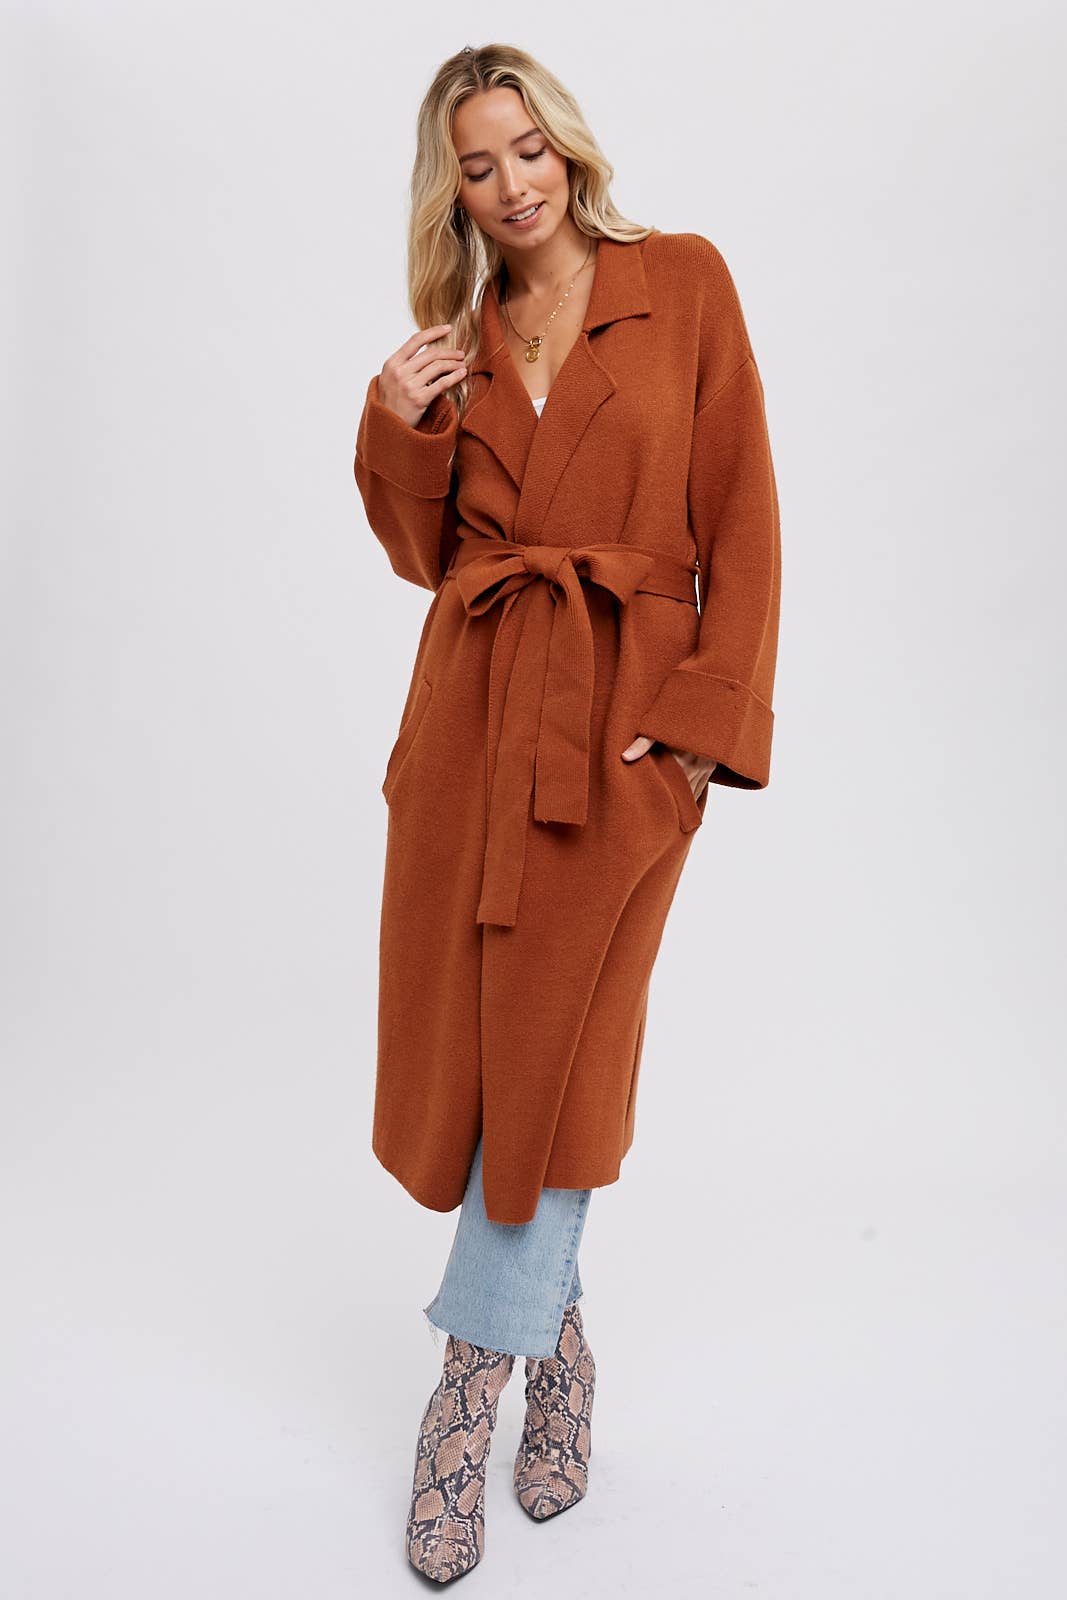 The "Color Tour" Knit Trench Coat